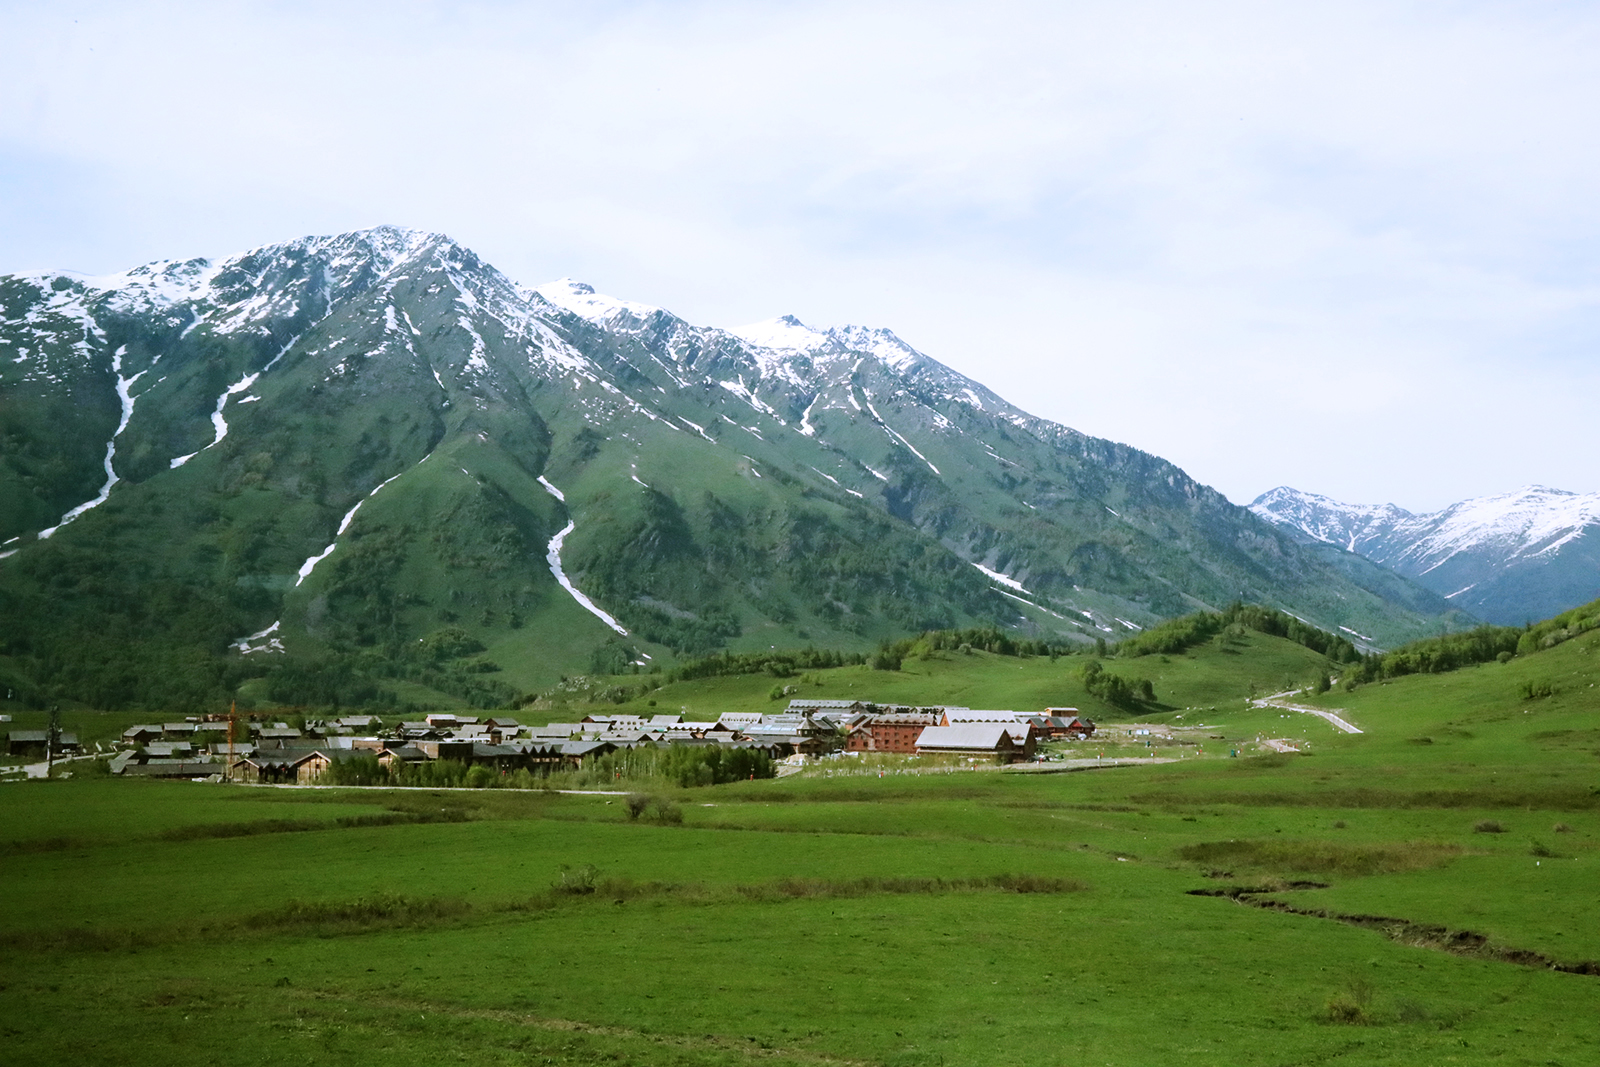 Located deep in the Altai Mountains, Hemu Village in Altay, Xinjiang is one of the northernmost settlements in western China. /CGTN